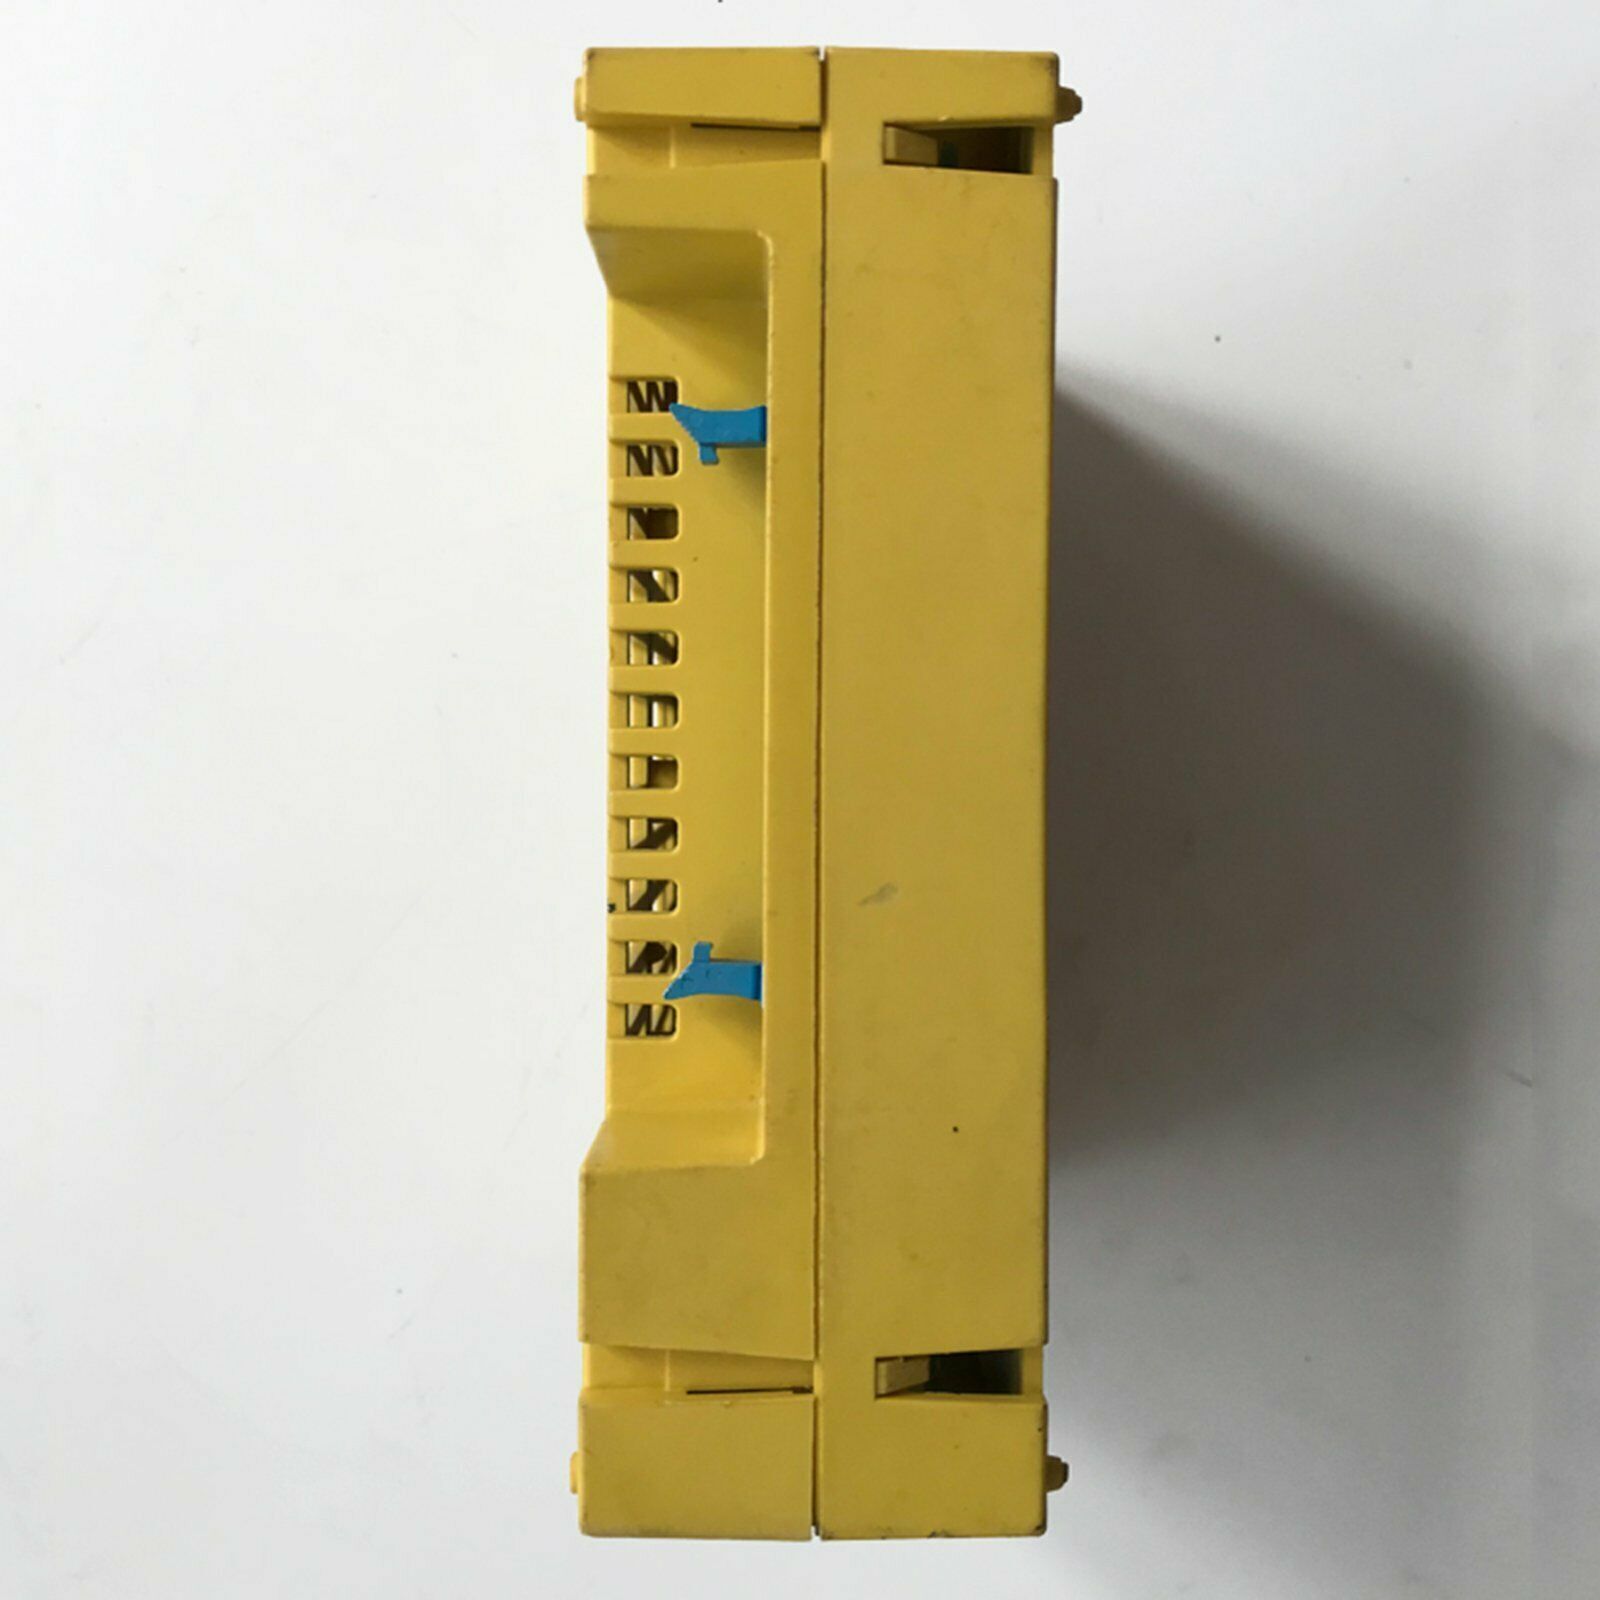 used One  For Fanuc A02B-0236-C204 IO Module Tested in Good Condition